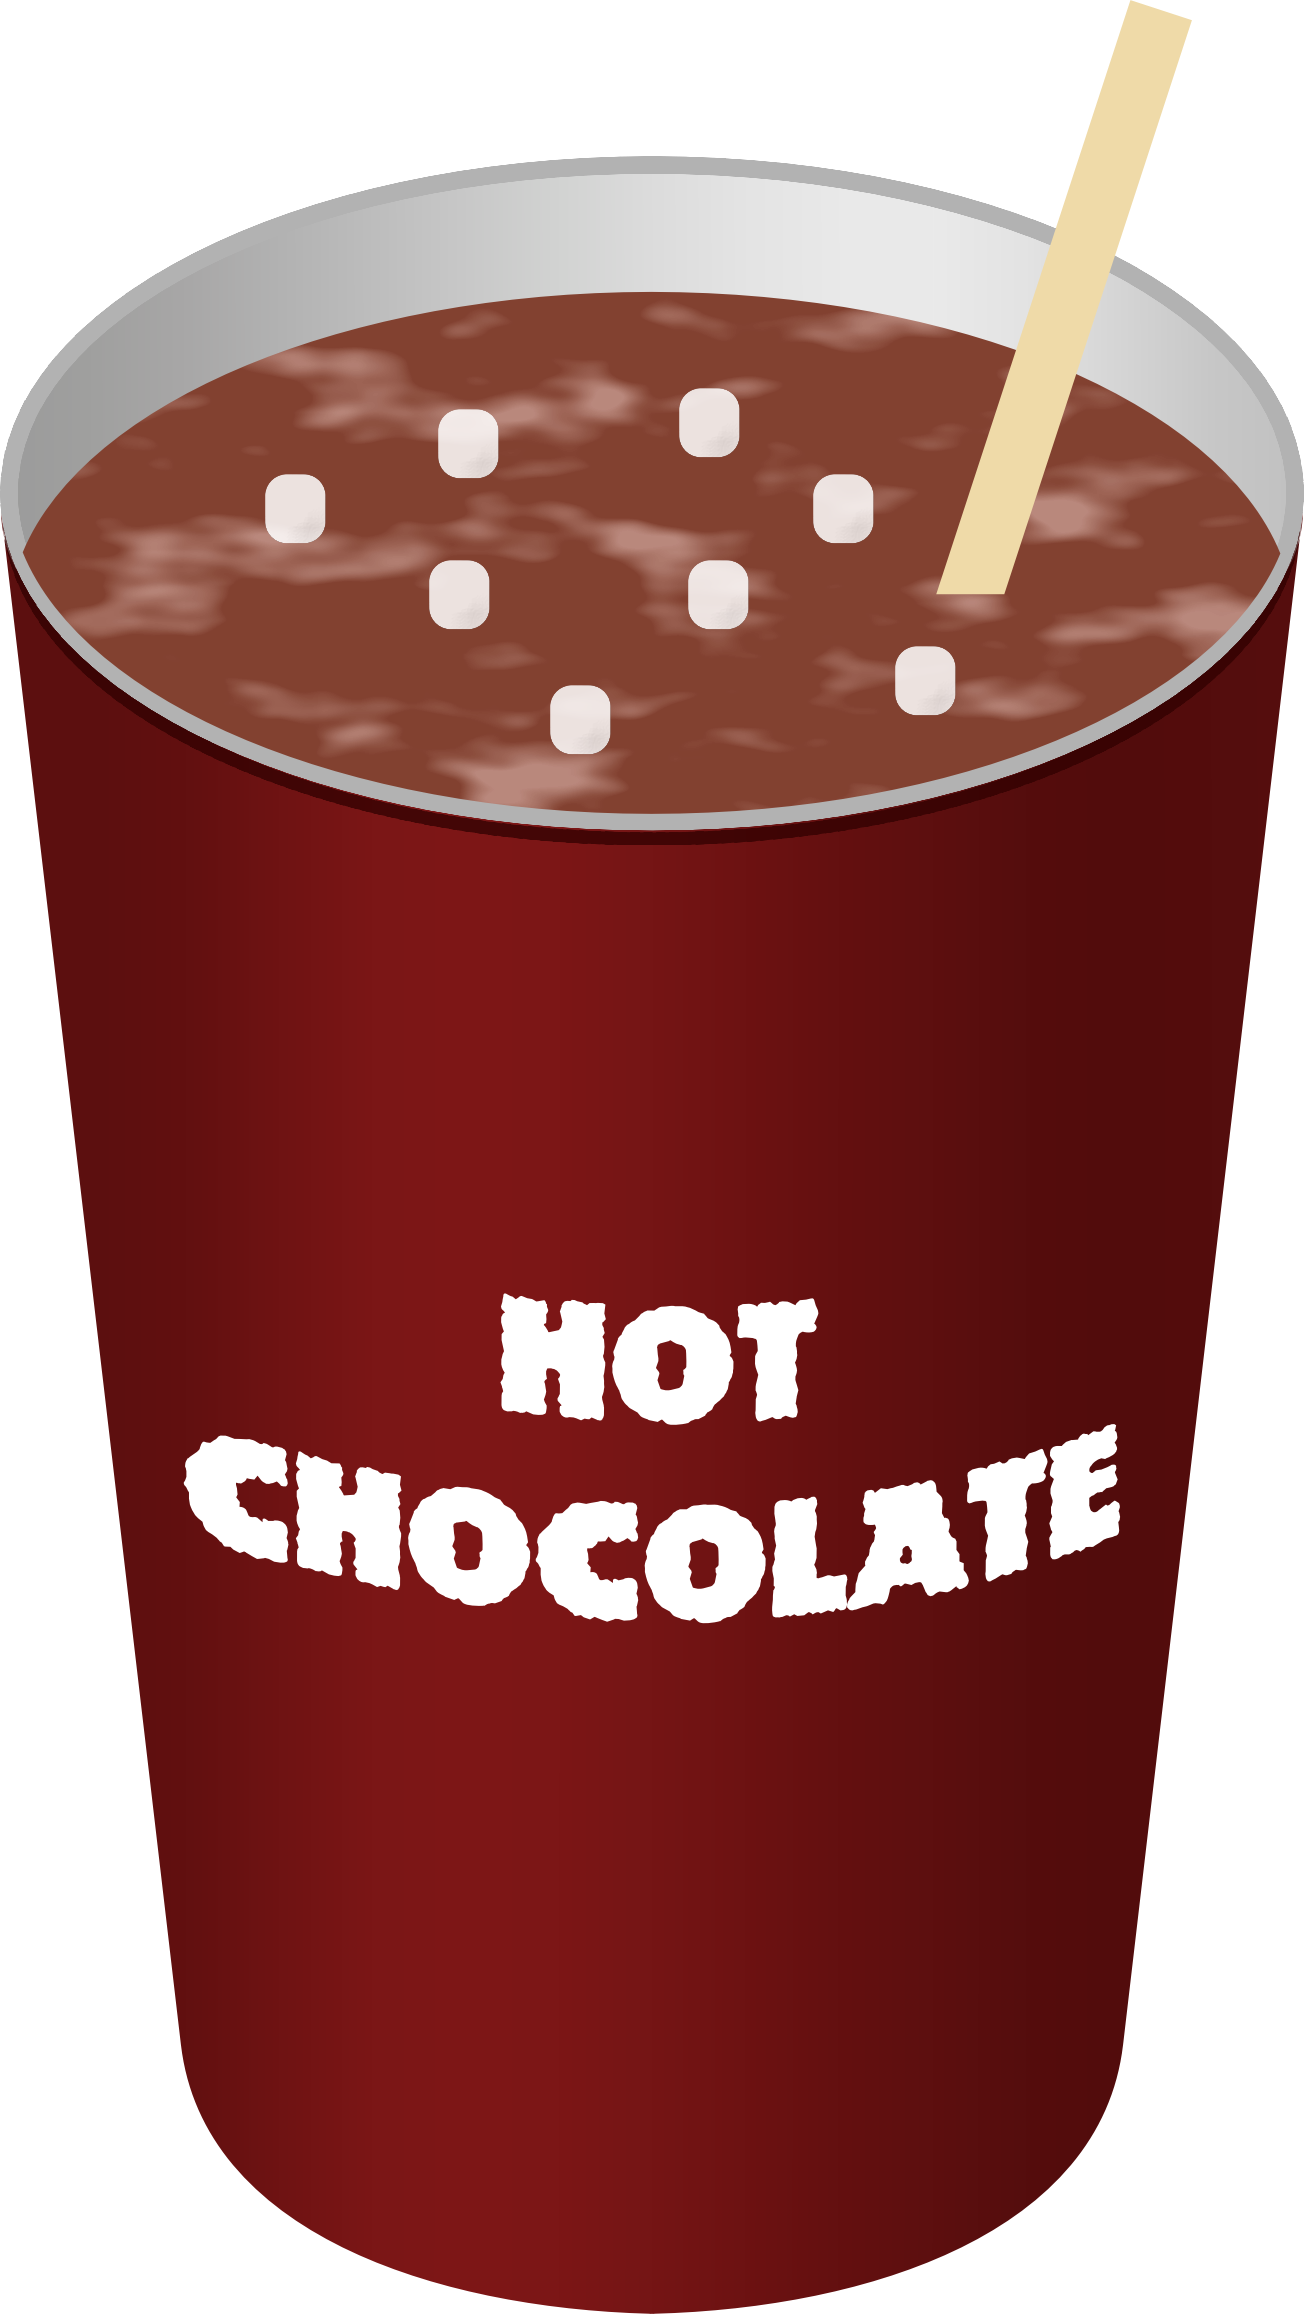 PNG Hot Chocolate - 69742